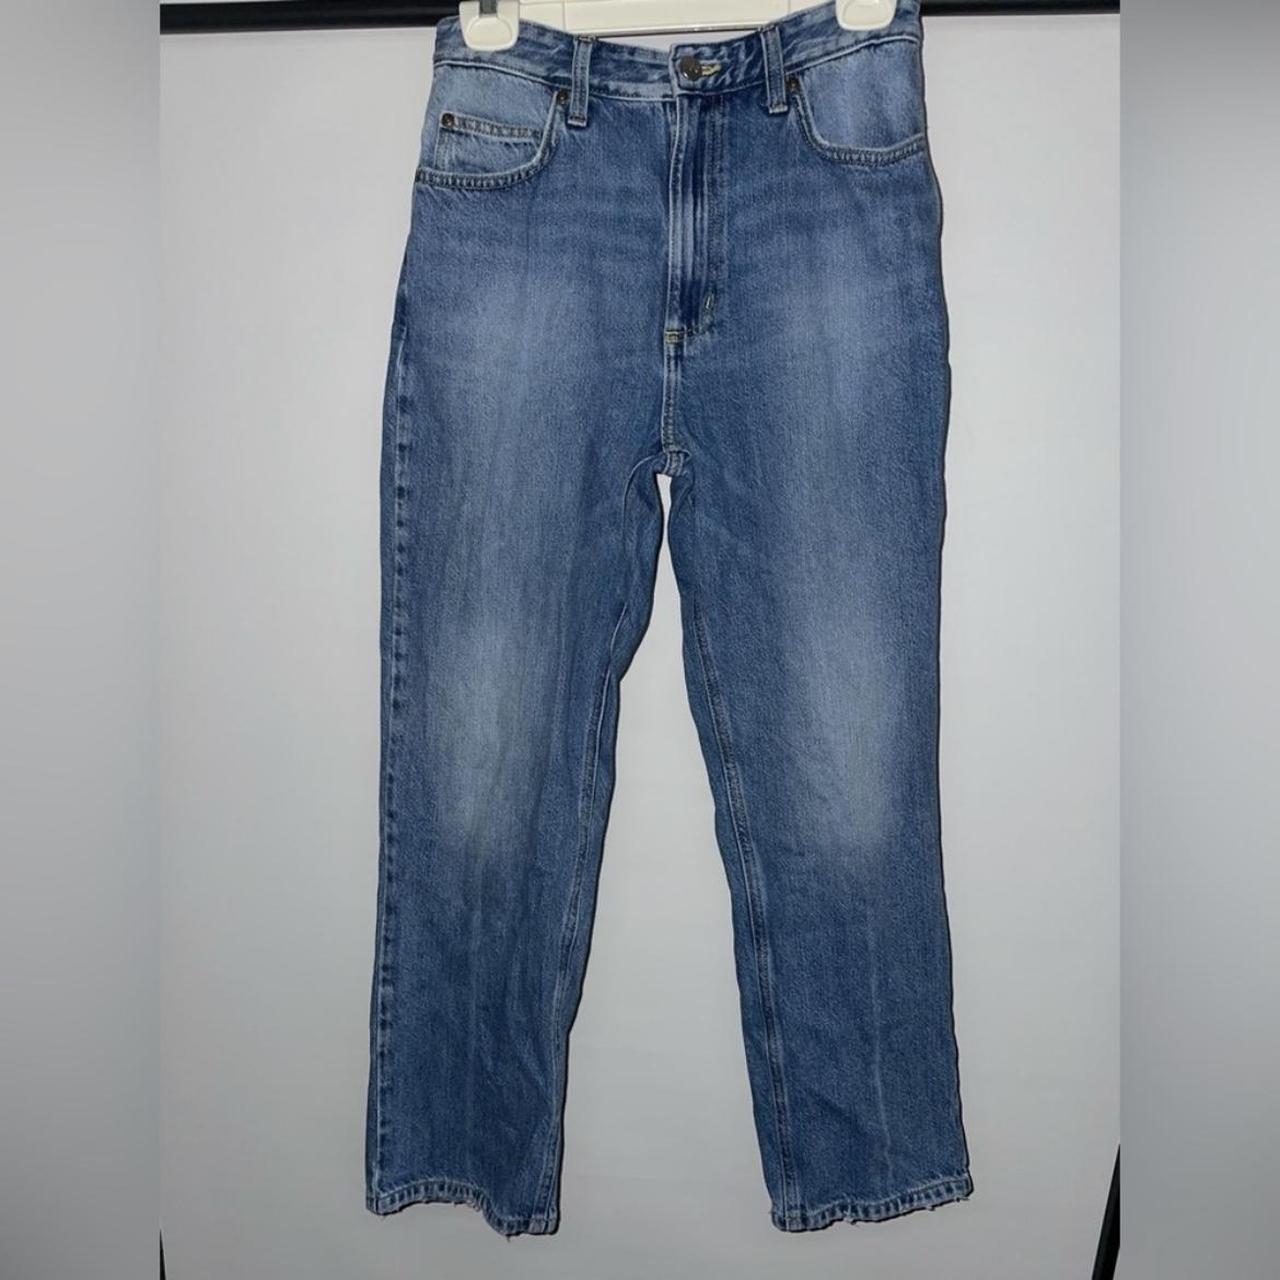 Lee Straight Leg High Rise Jeans Size 28 Worn one or... - Depop